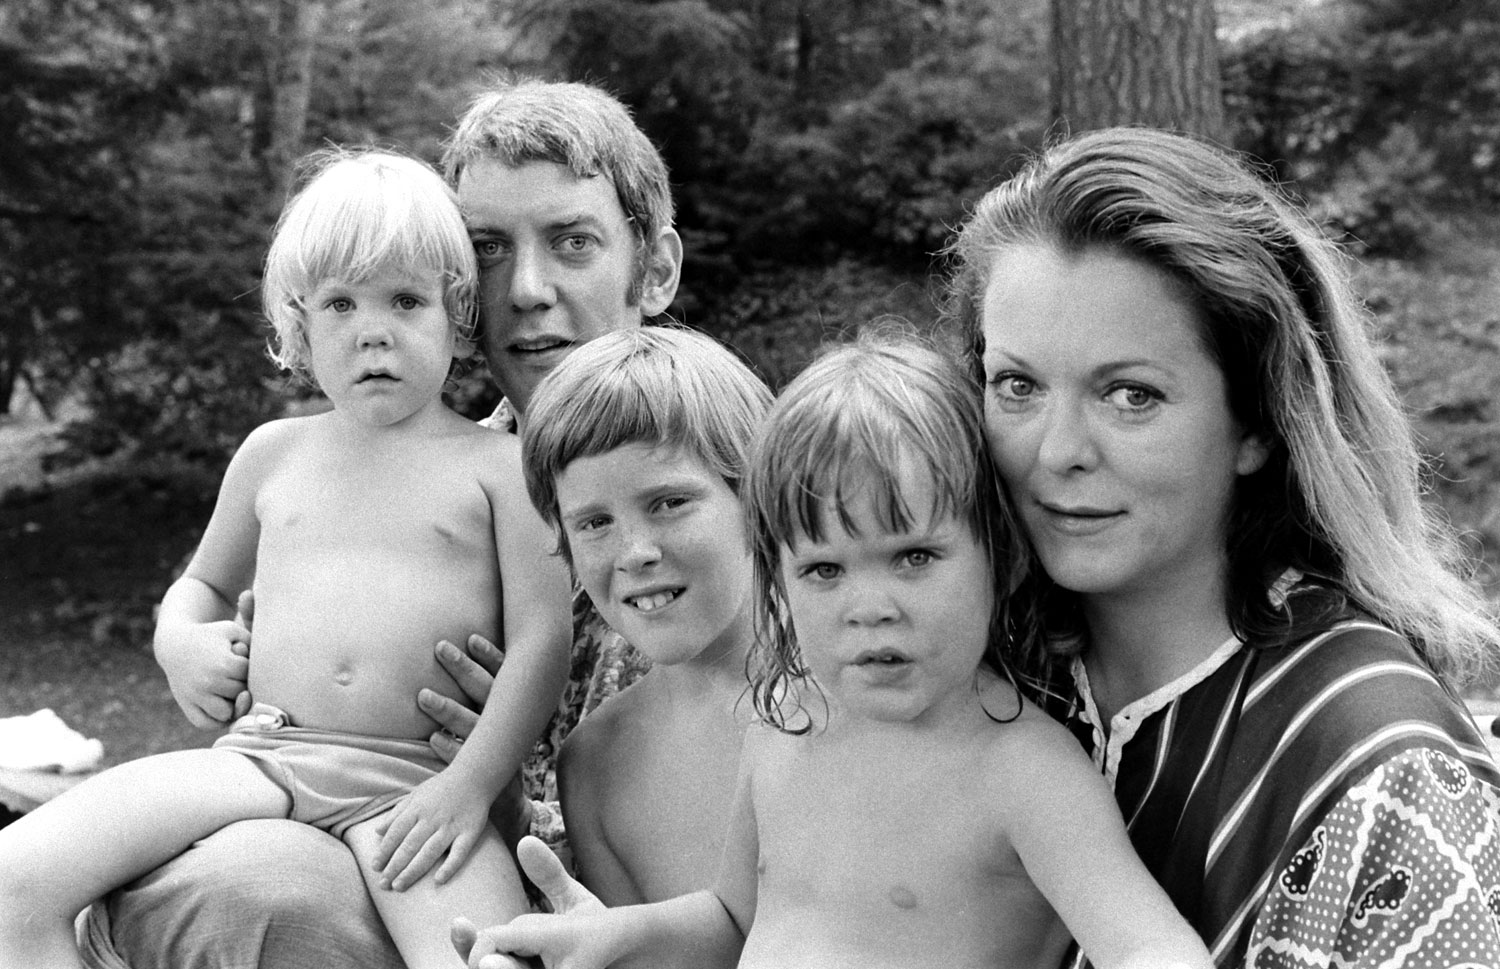 Donald Sutherland with his wife, Shirley Douglas, and their children (l-r): Kiefer Sutherland, Tom Douglas (Shirley's son from her first marriage), Rachel Sutherland, in California, 1970.